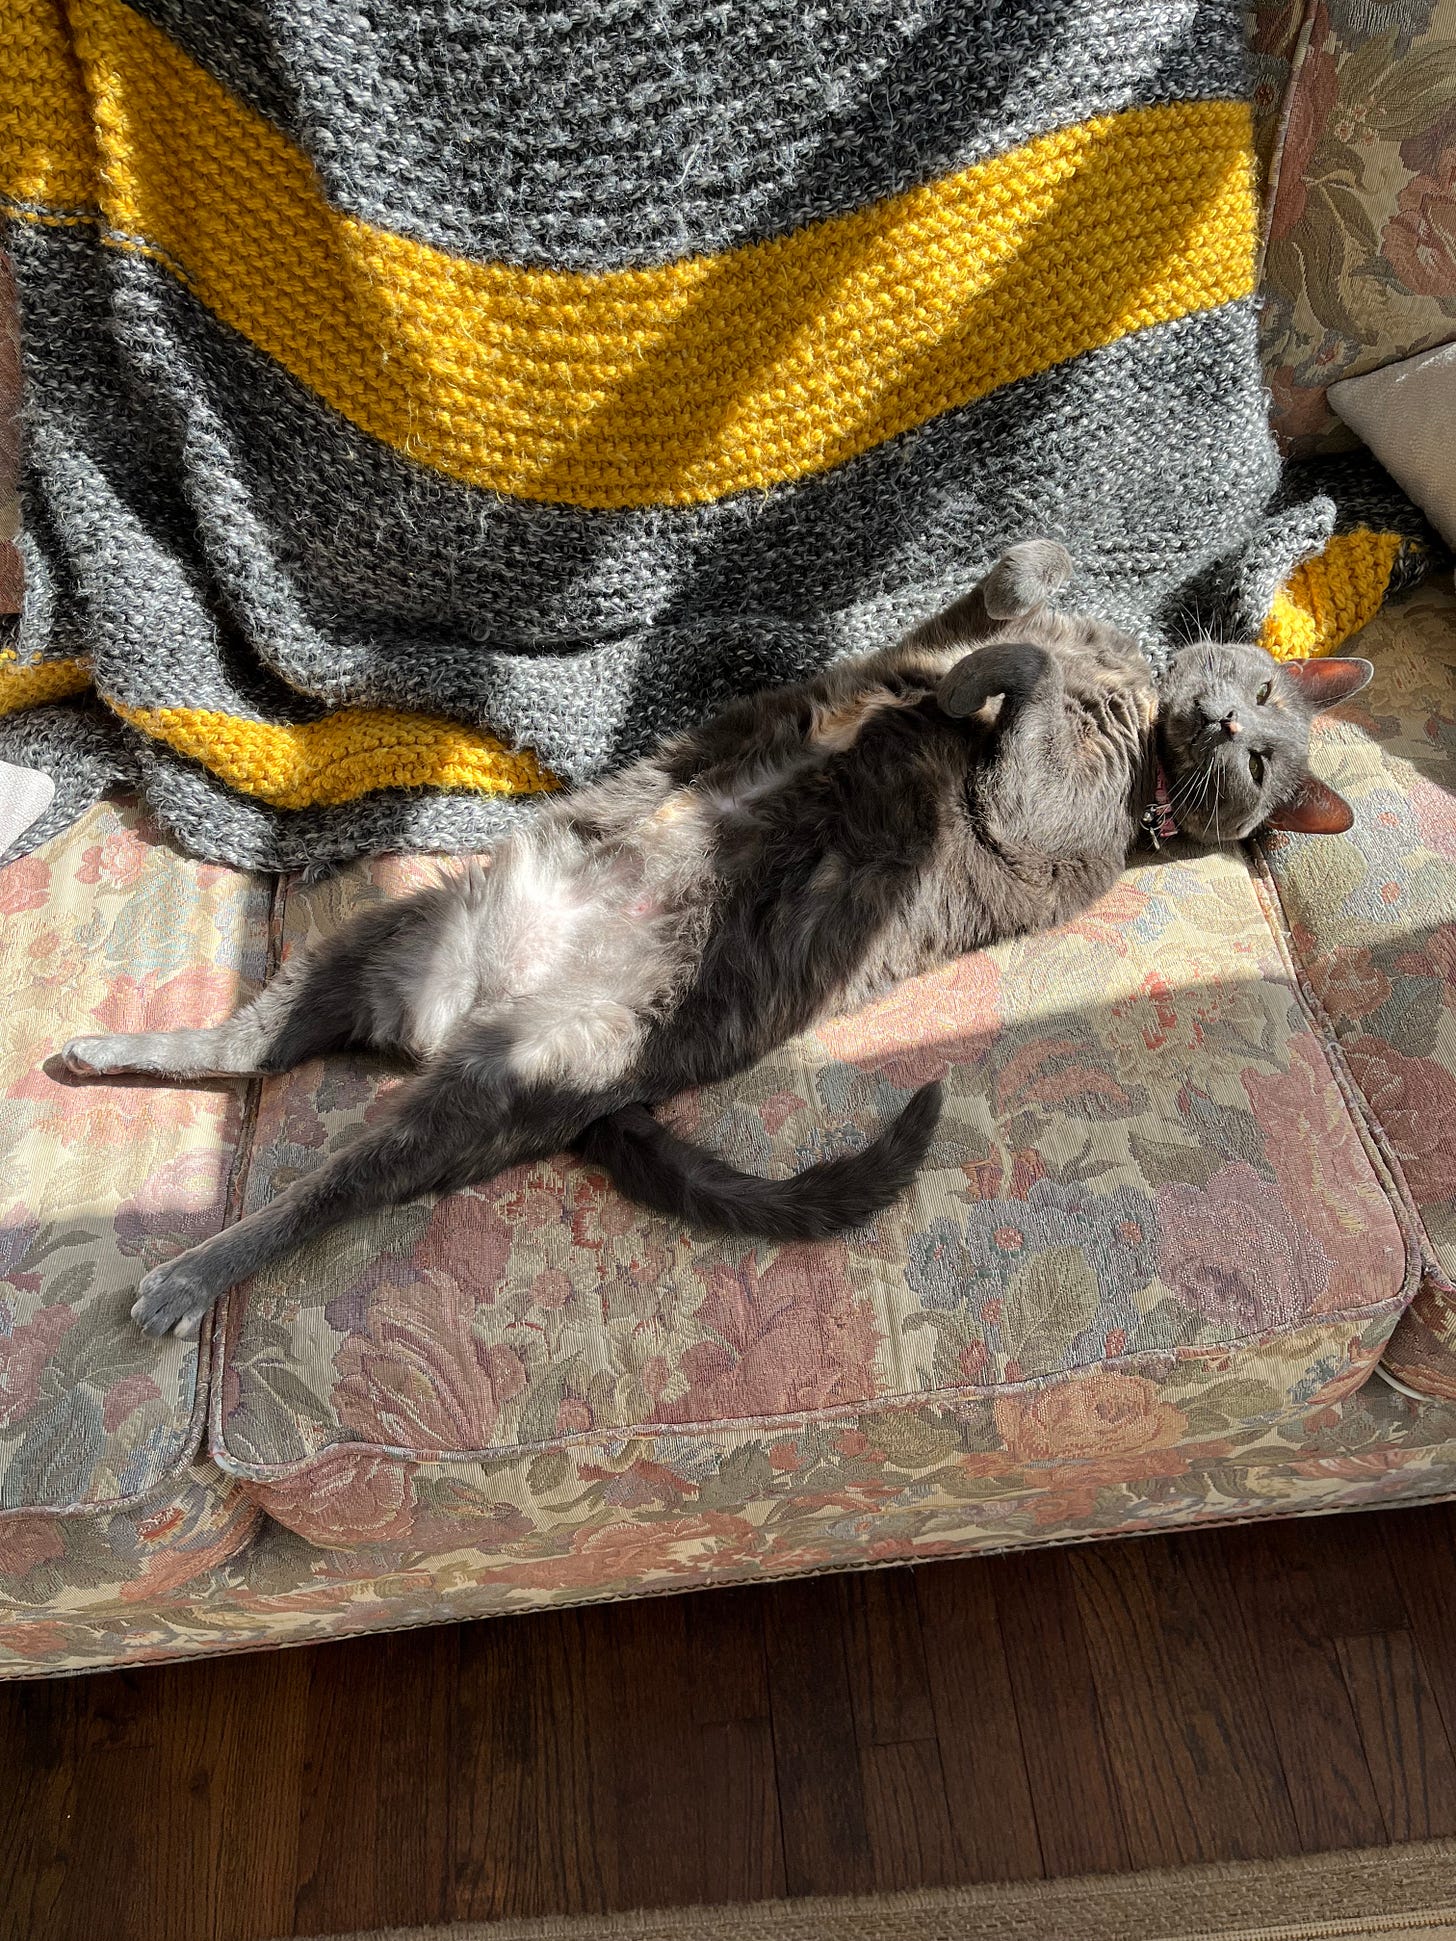 A large gray cat stretched out, showing her stomach, in a patch of sunlight.